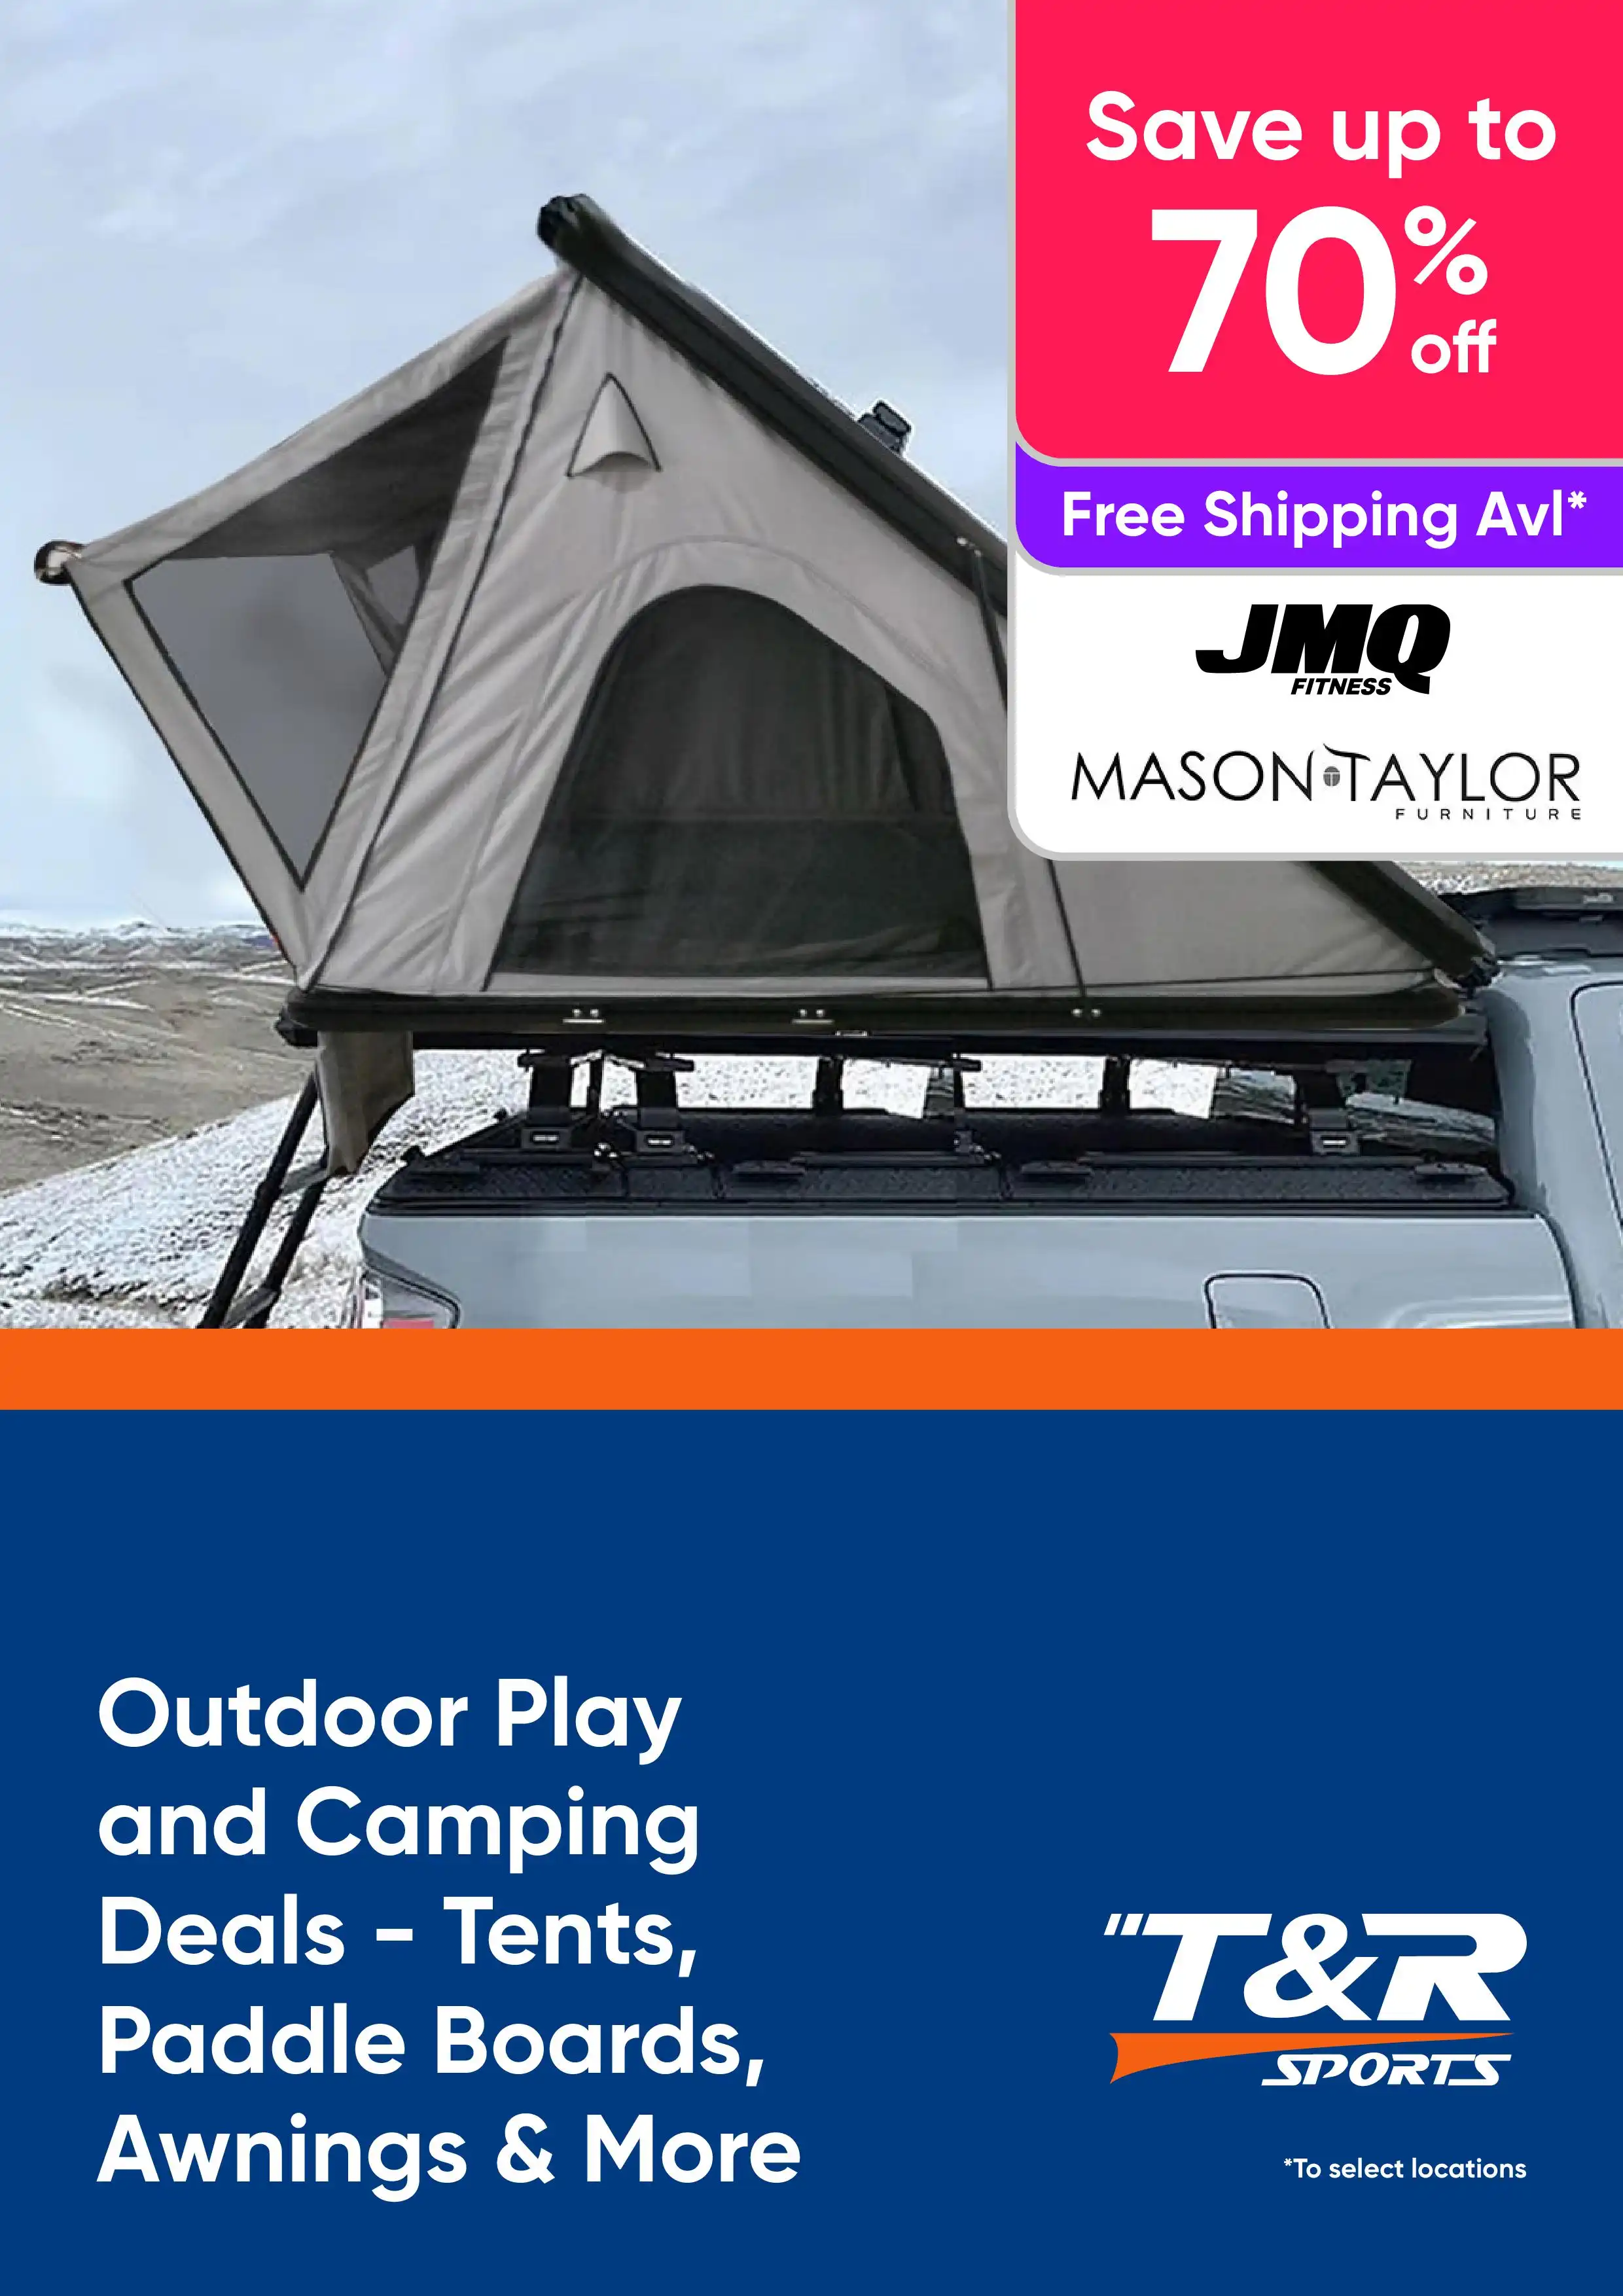 Outdoor Play and Camping Deals - Up to 70% Off Tents, Paddle Boards, Awnings & More